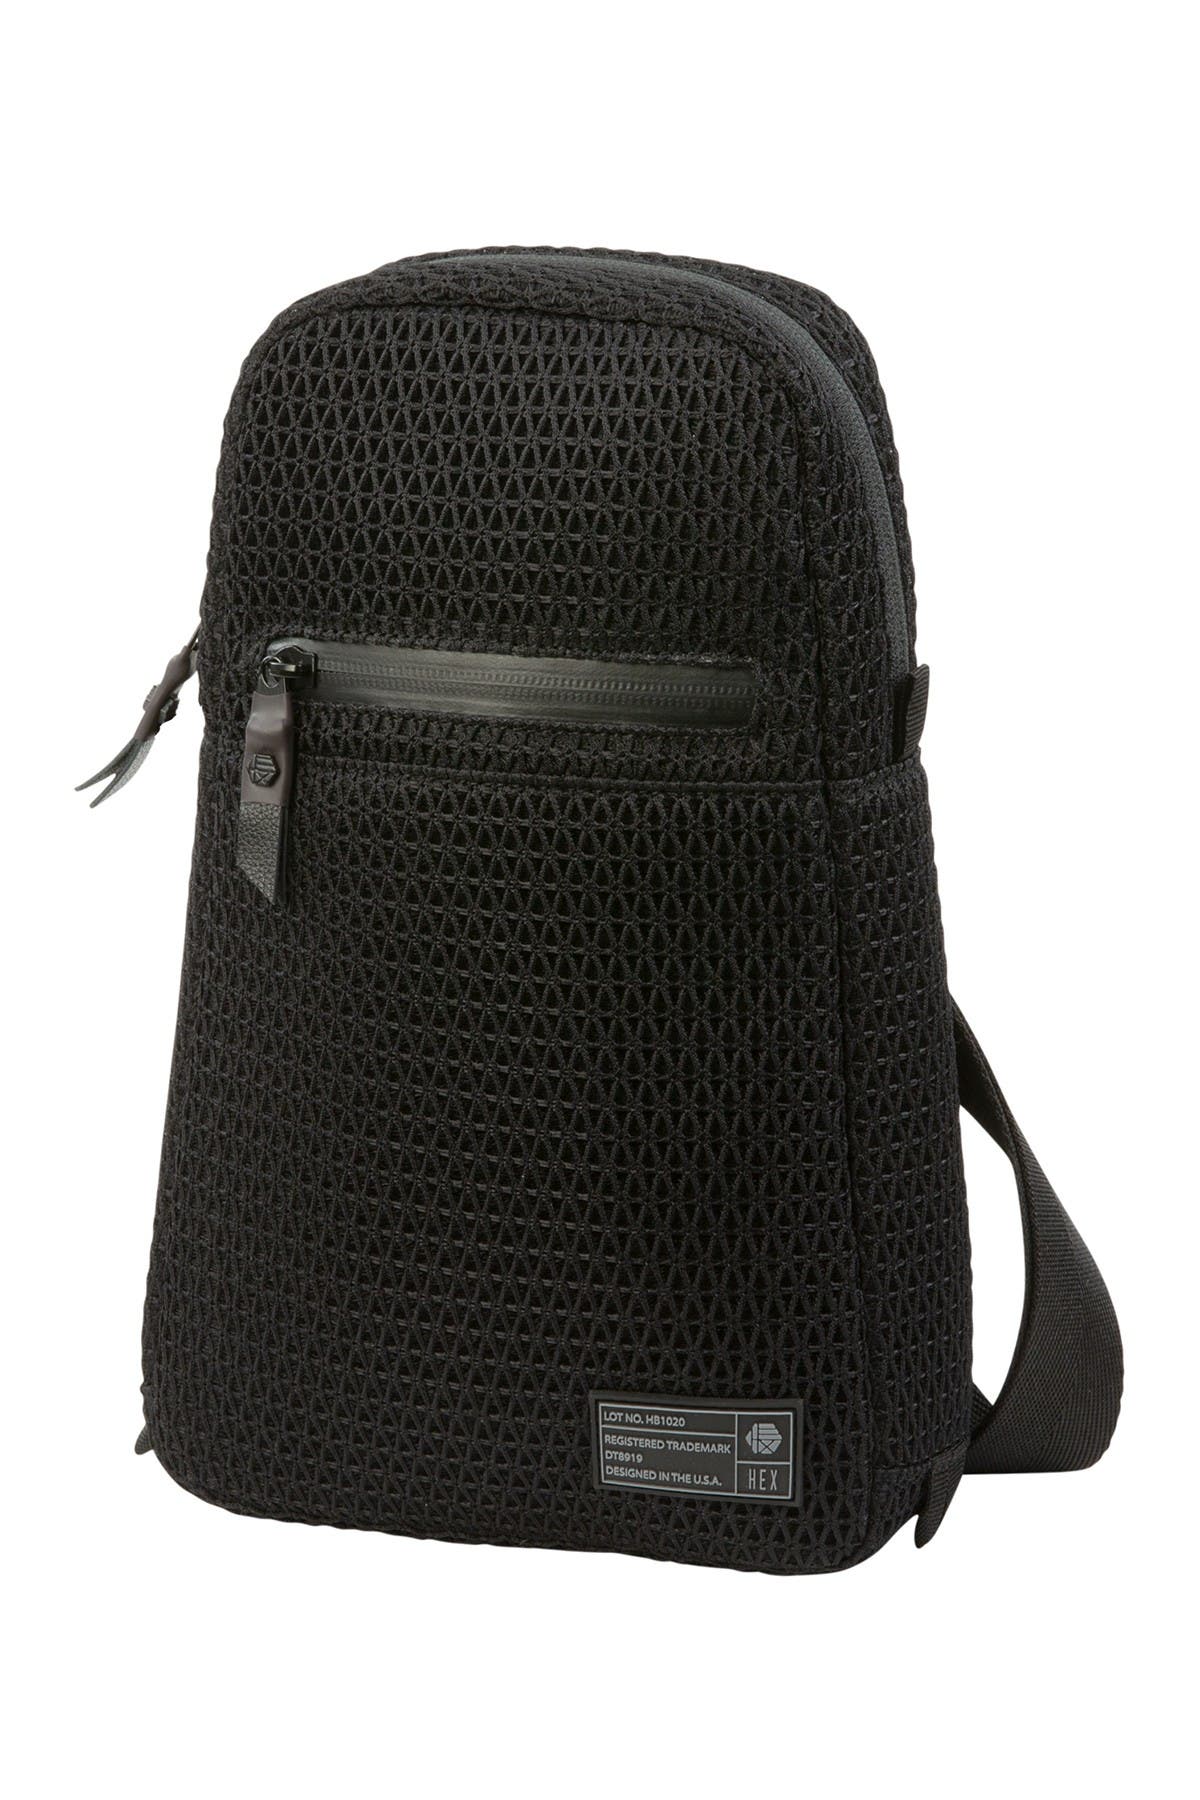 Hex Accessories Rip Stop Single Strap Backpack In Black